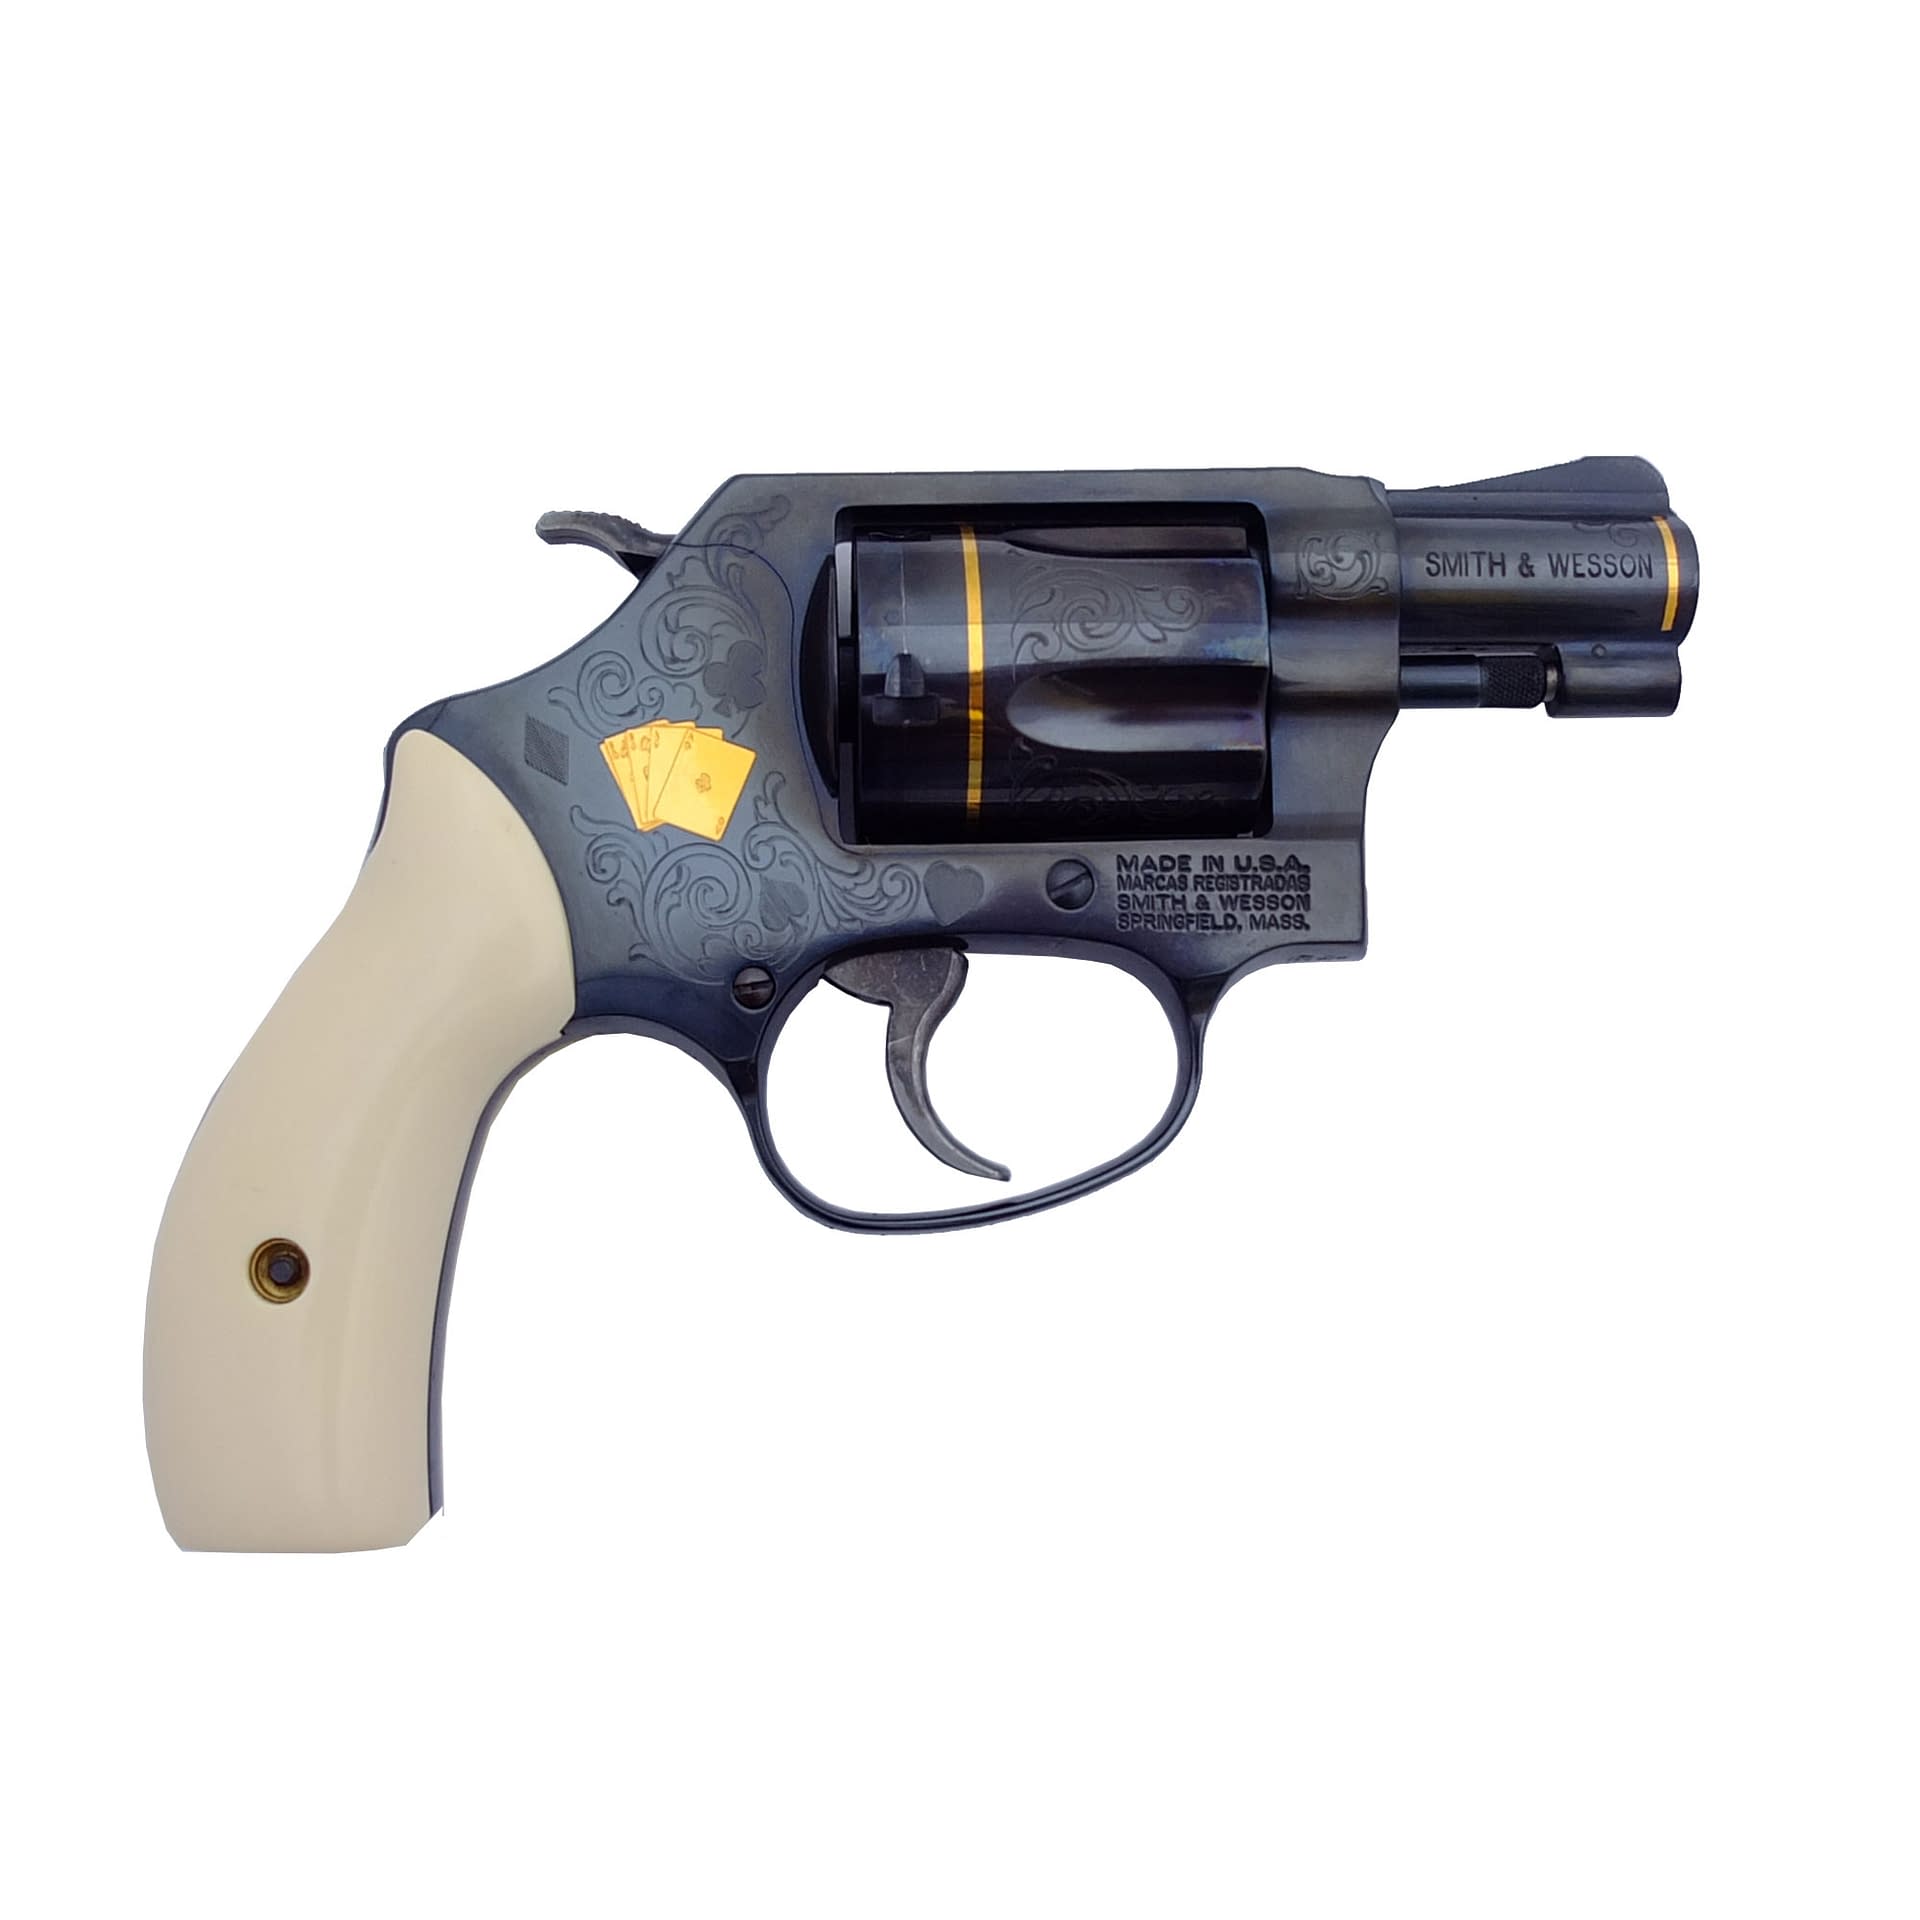 Smith & Wesson Limited Edition Texas Holdem